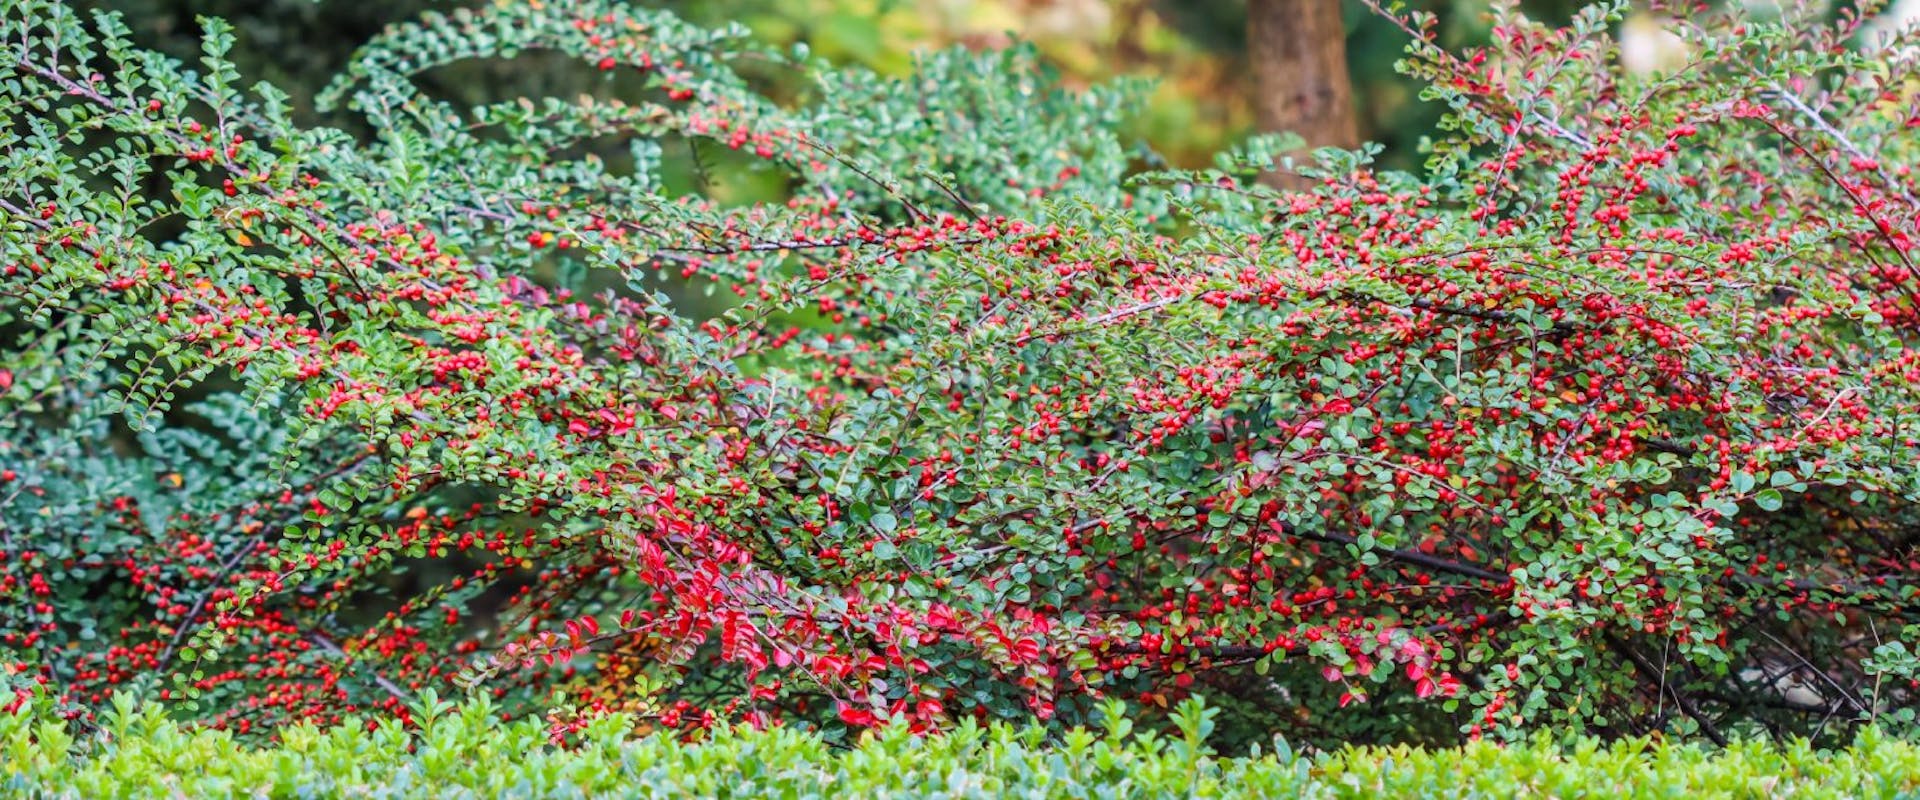 A cotoneaster plant with red berries.